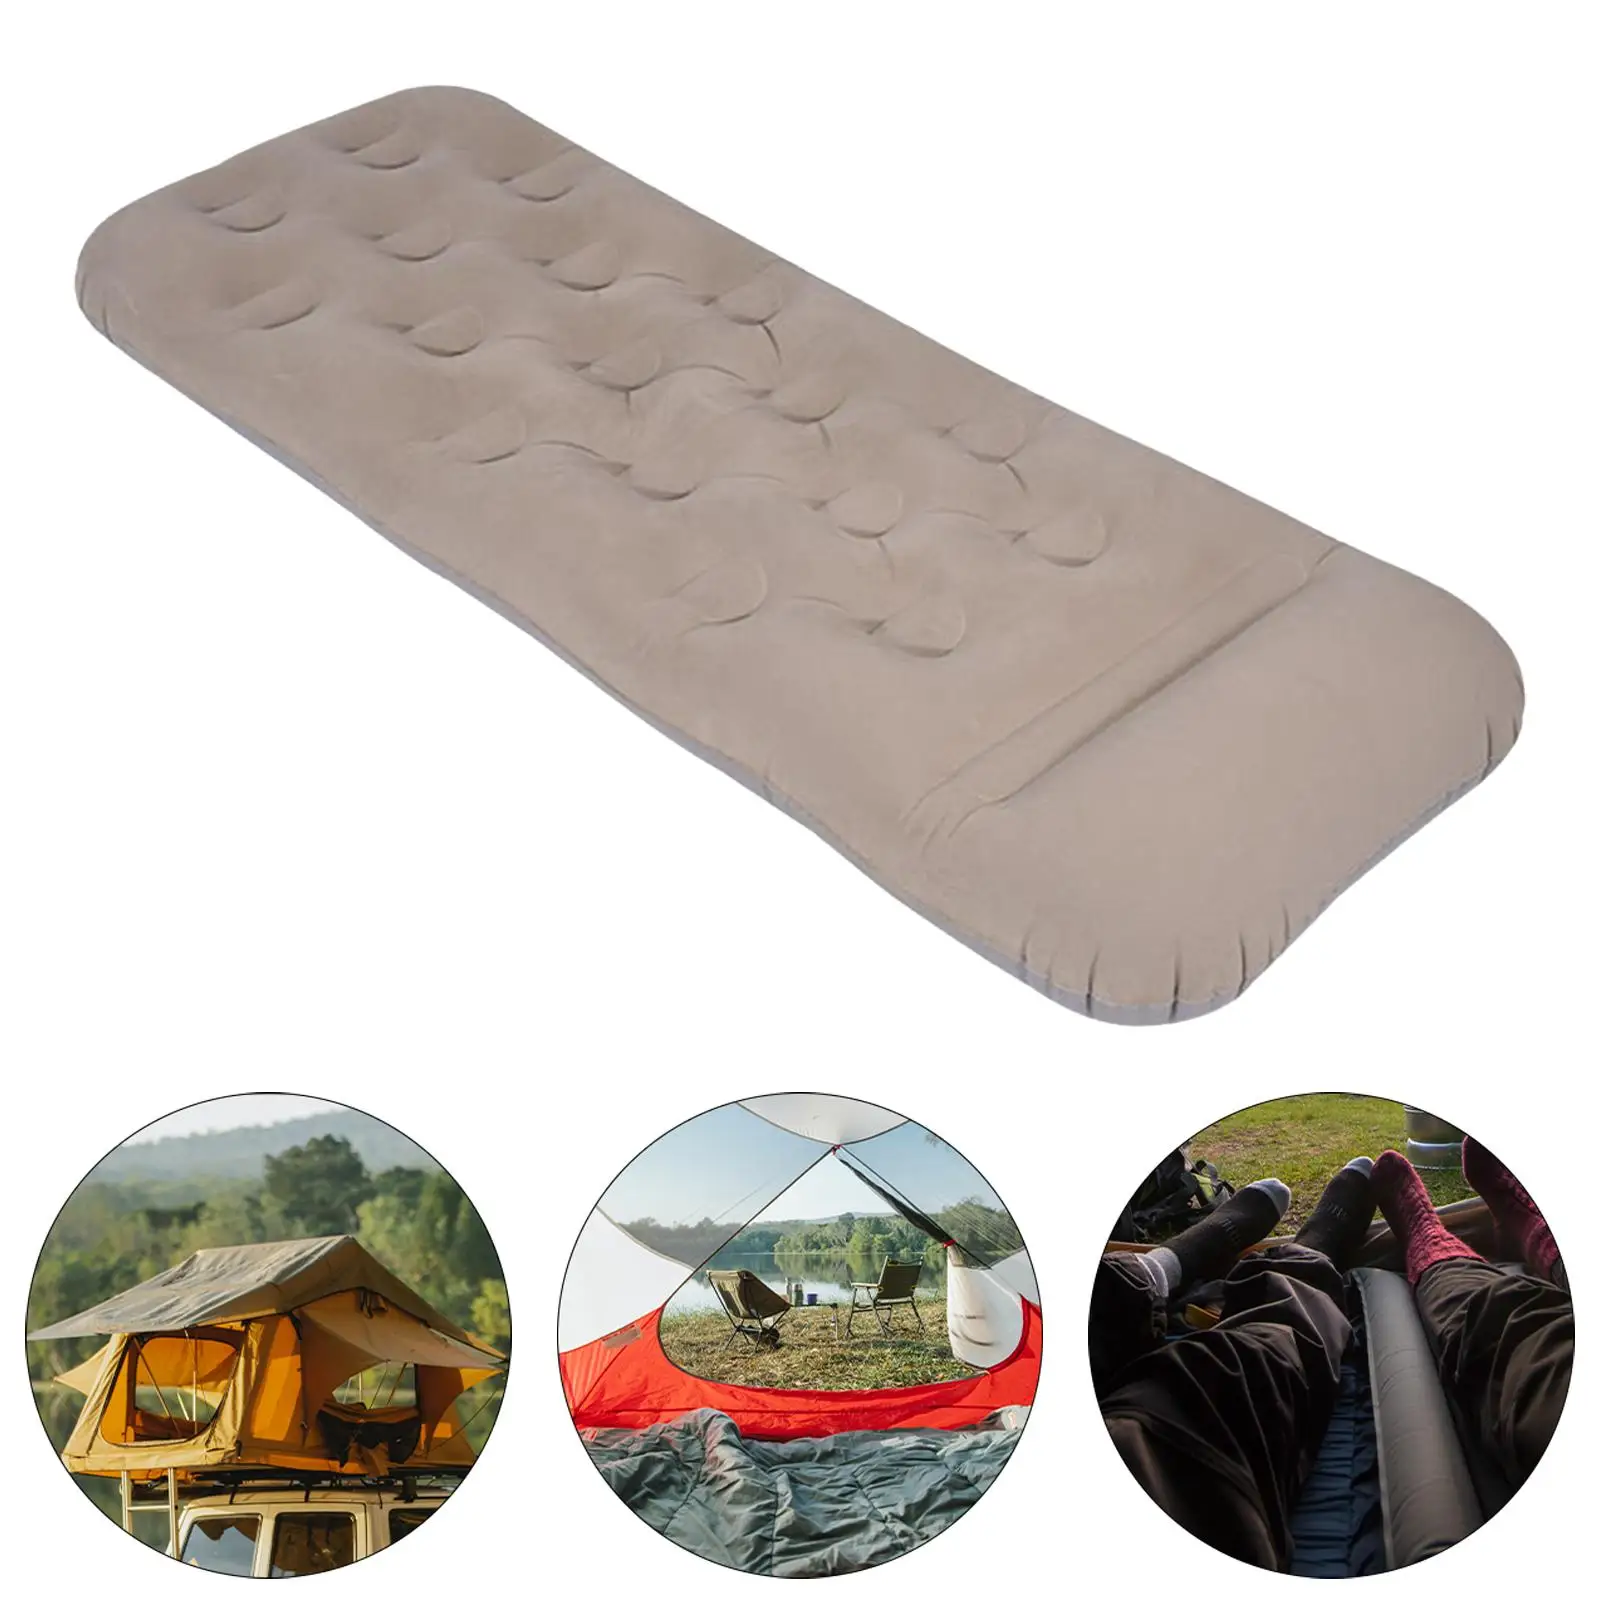 Camping Air Mattress Portable Foldable Durable Inflatable Mattress Air Bed Inflatable Mat for Indoor Outdoor Travel Tent Rooftop